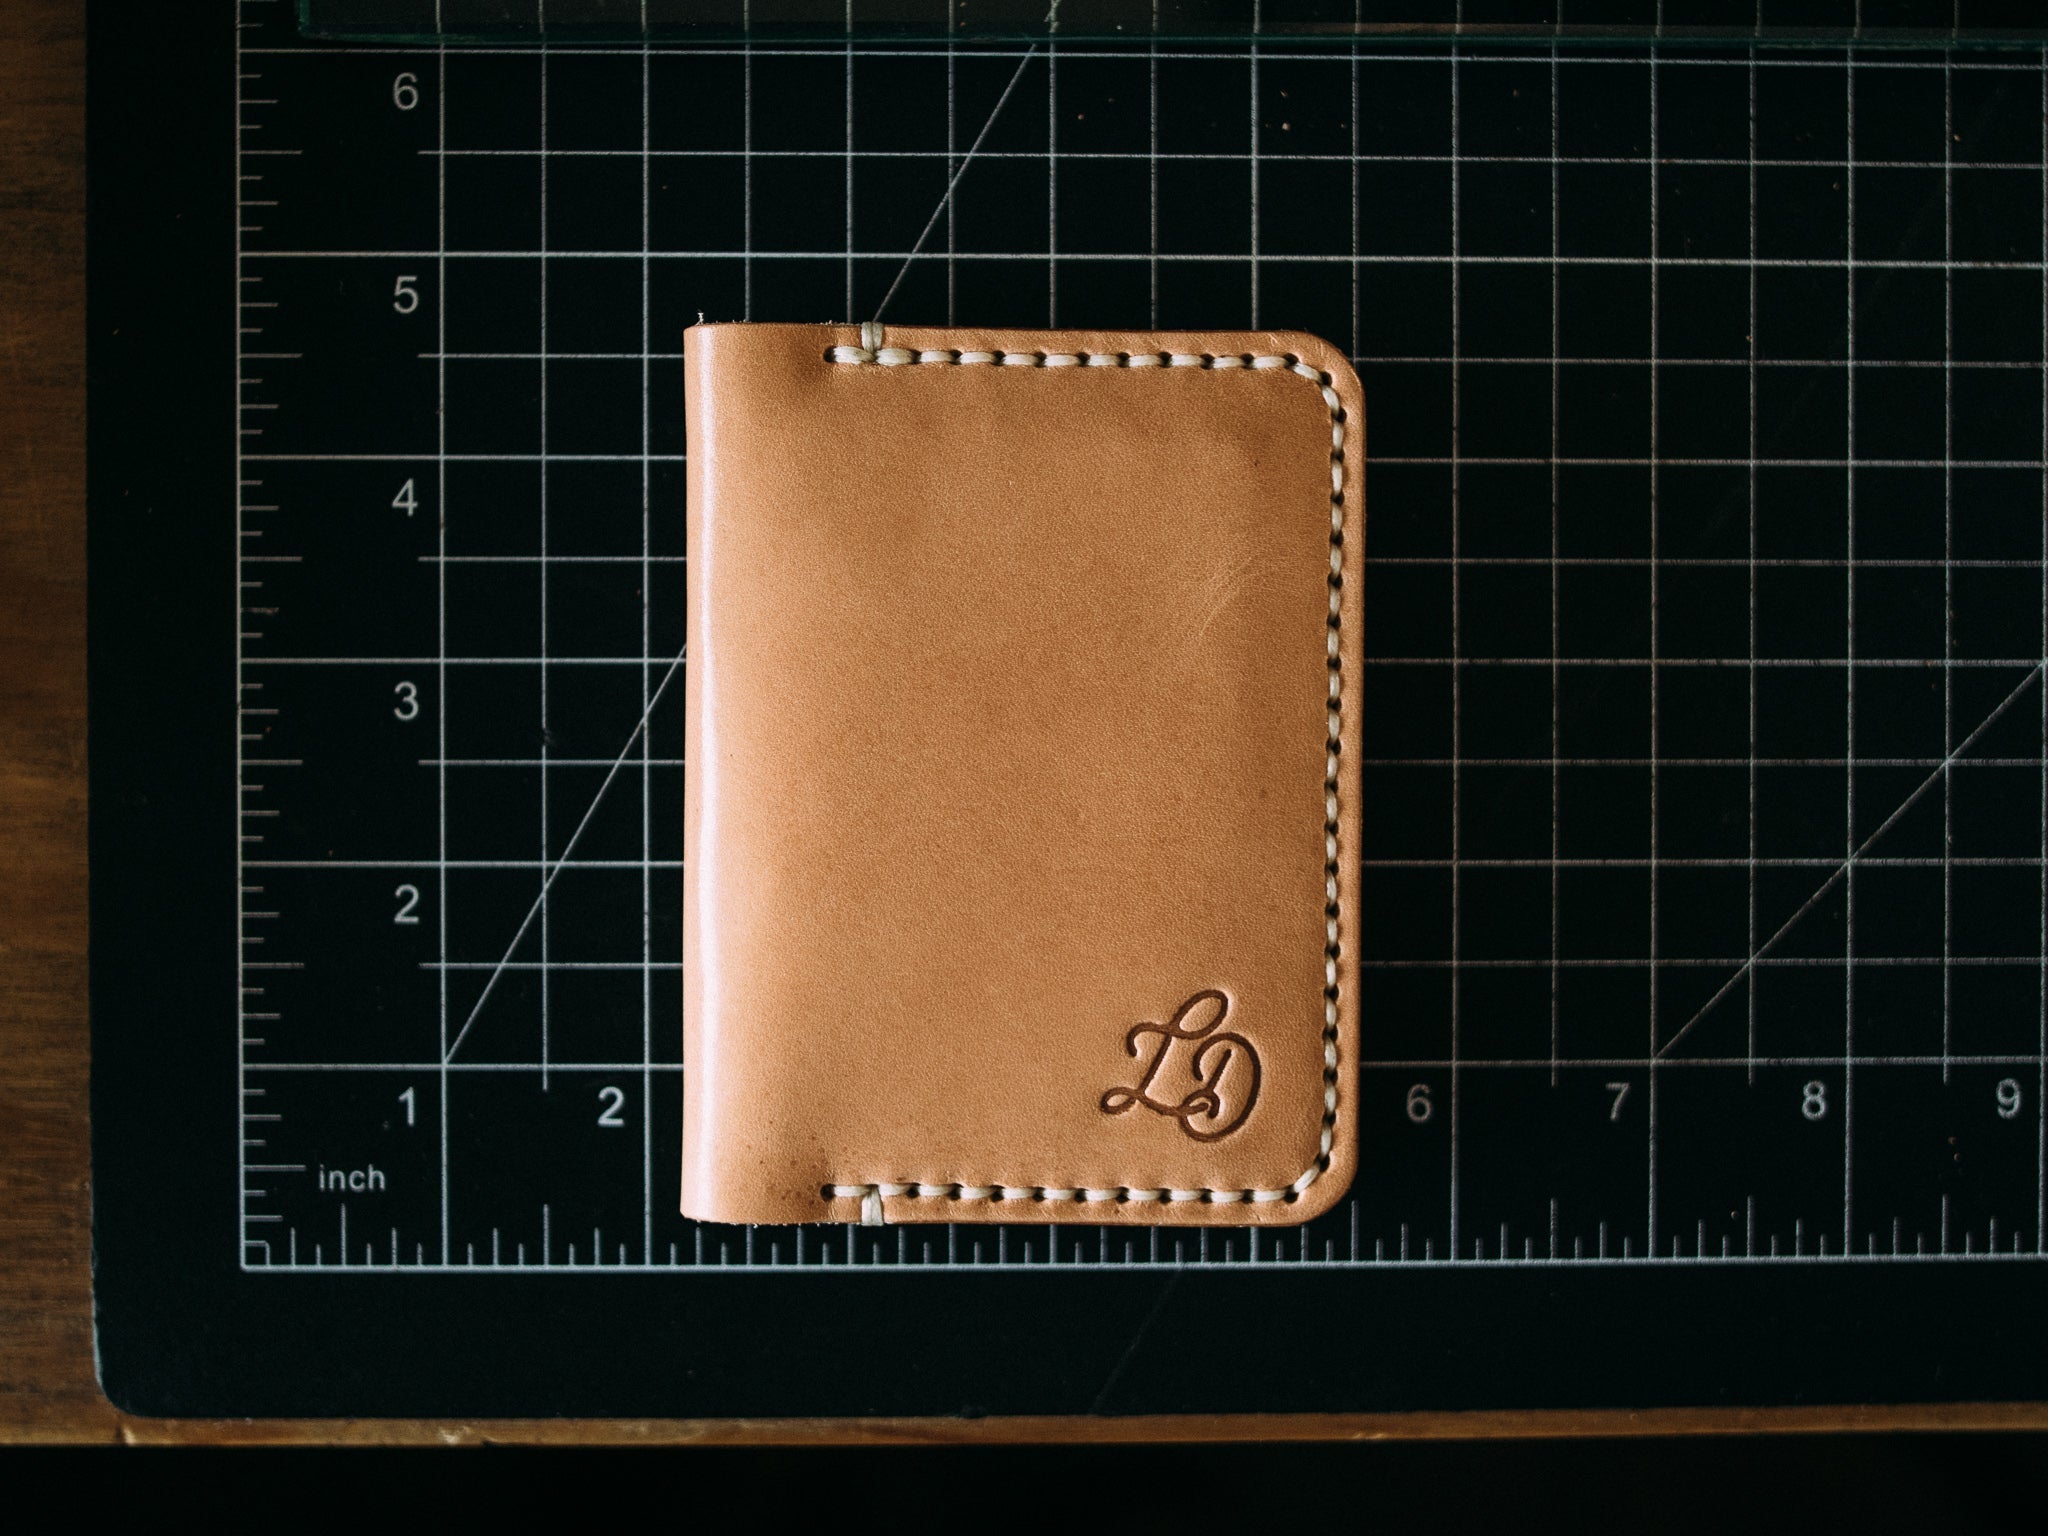 Leather Card Holder - The Slim Dutchman Navy / Brown